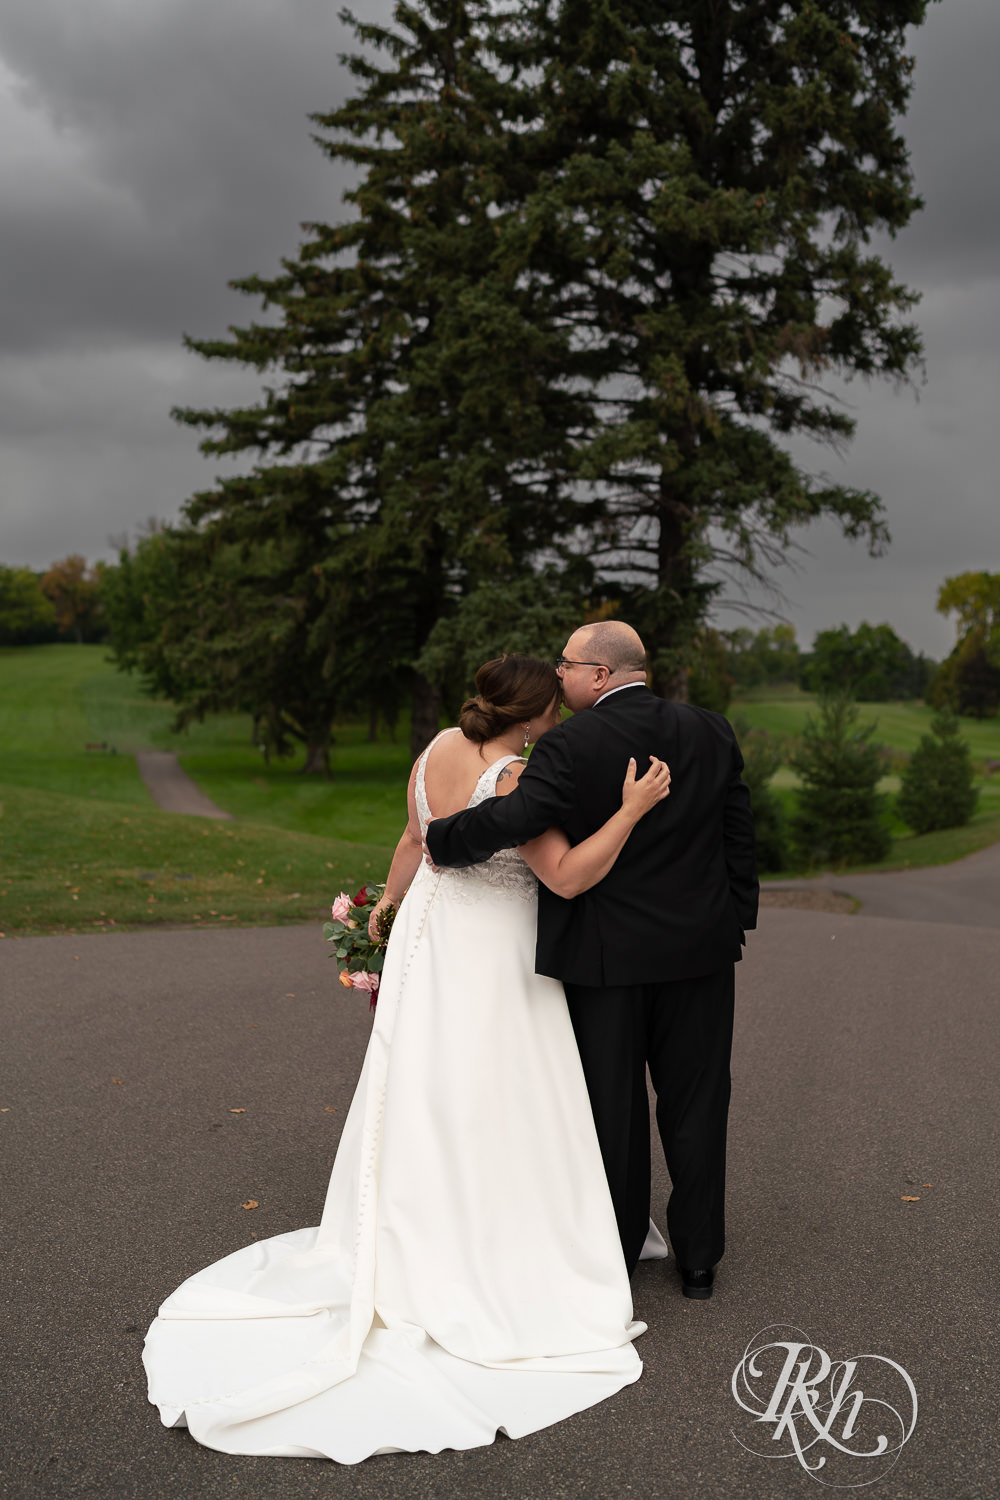 Groom kissing bride's head at Brookview Golf Course in Golden Valley, Minnesota.